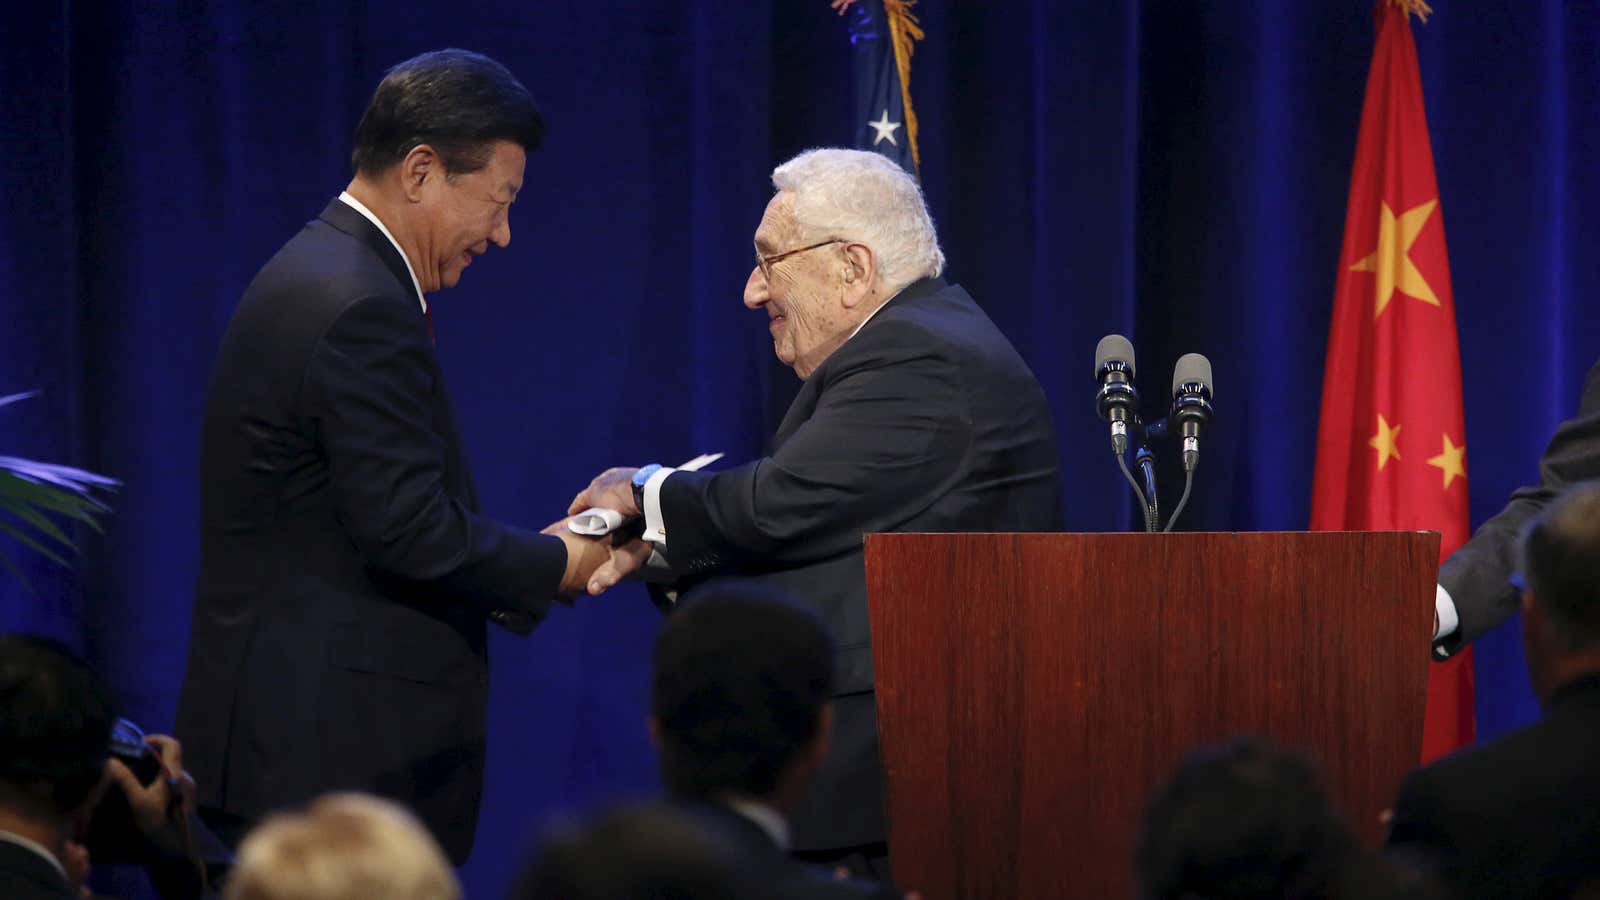 Henry Kissinger welcomes Xi Jinping in Seattle